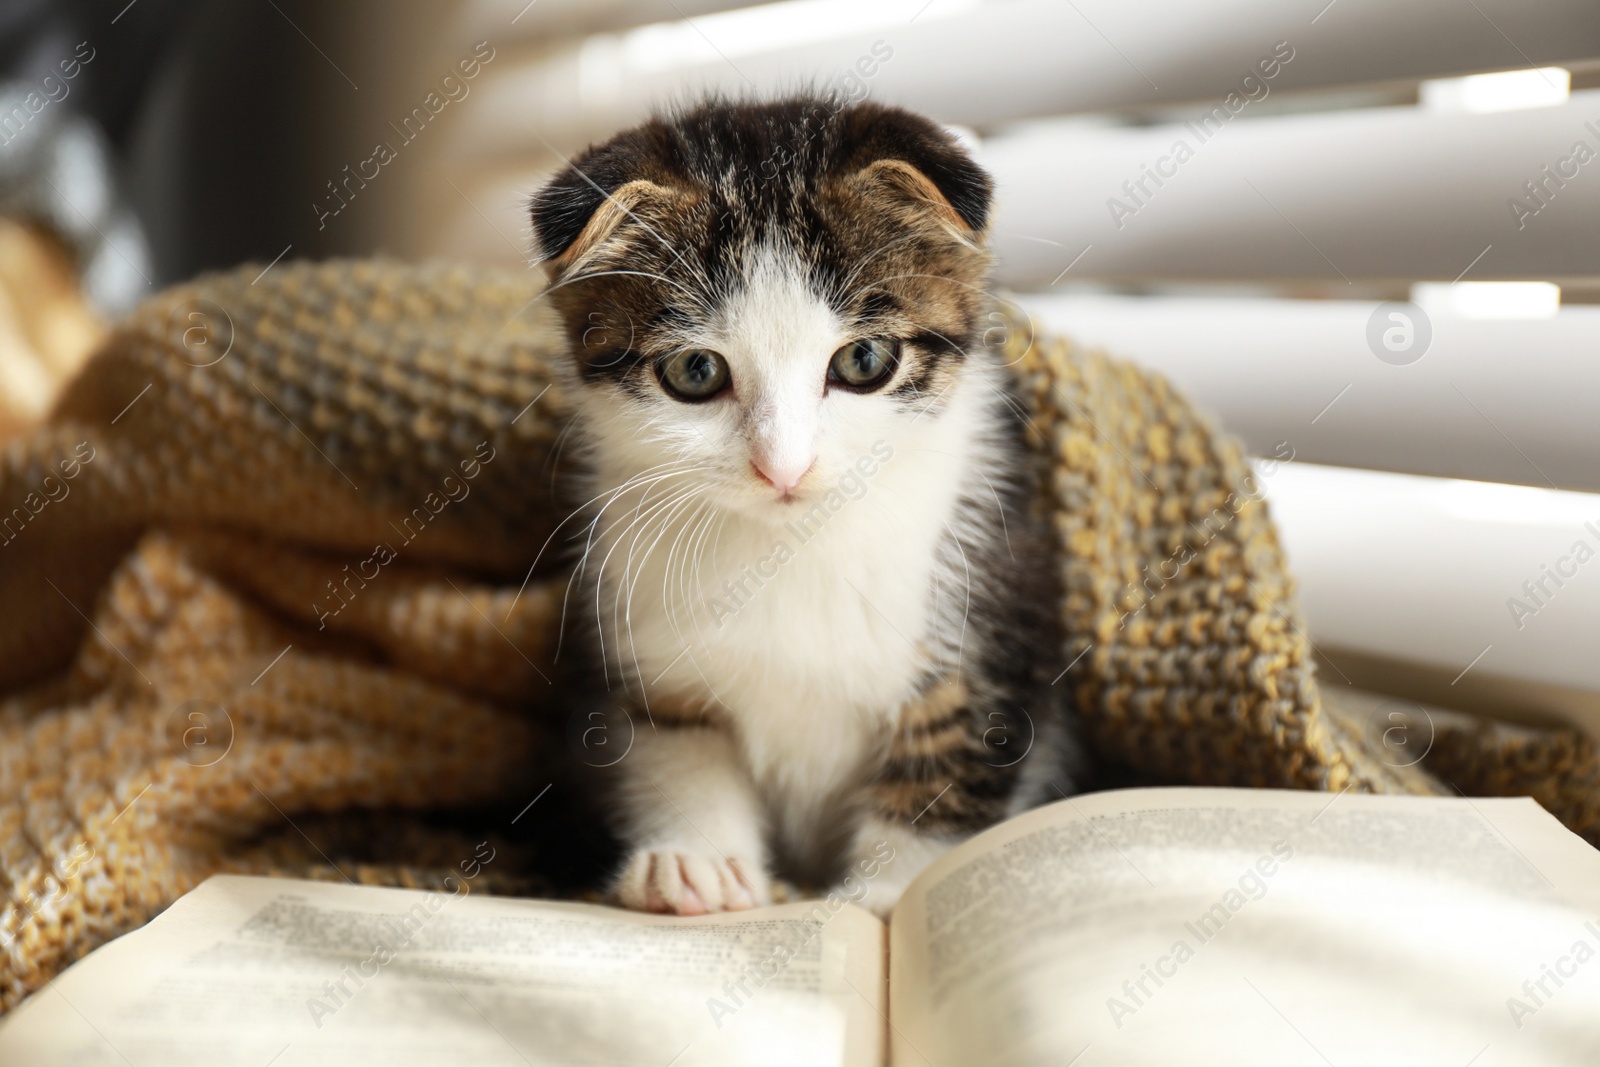 Photo of Adorable little kitten and book near window indoors